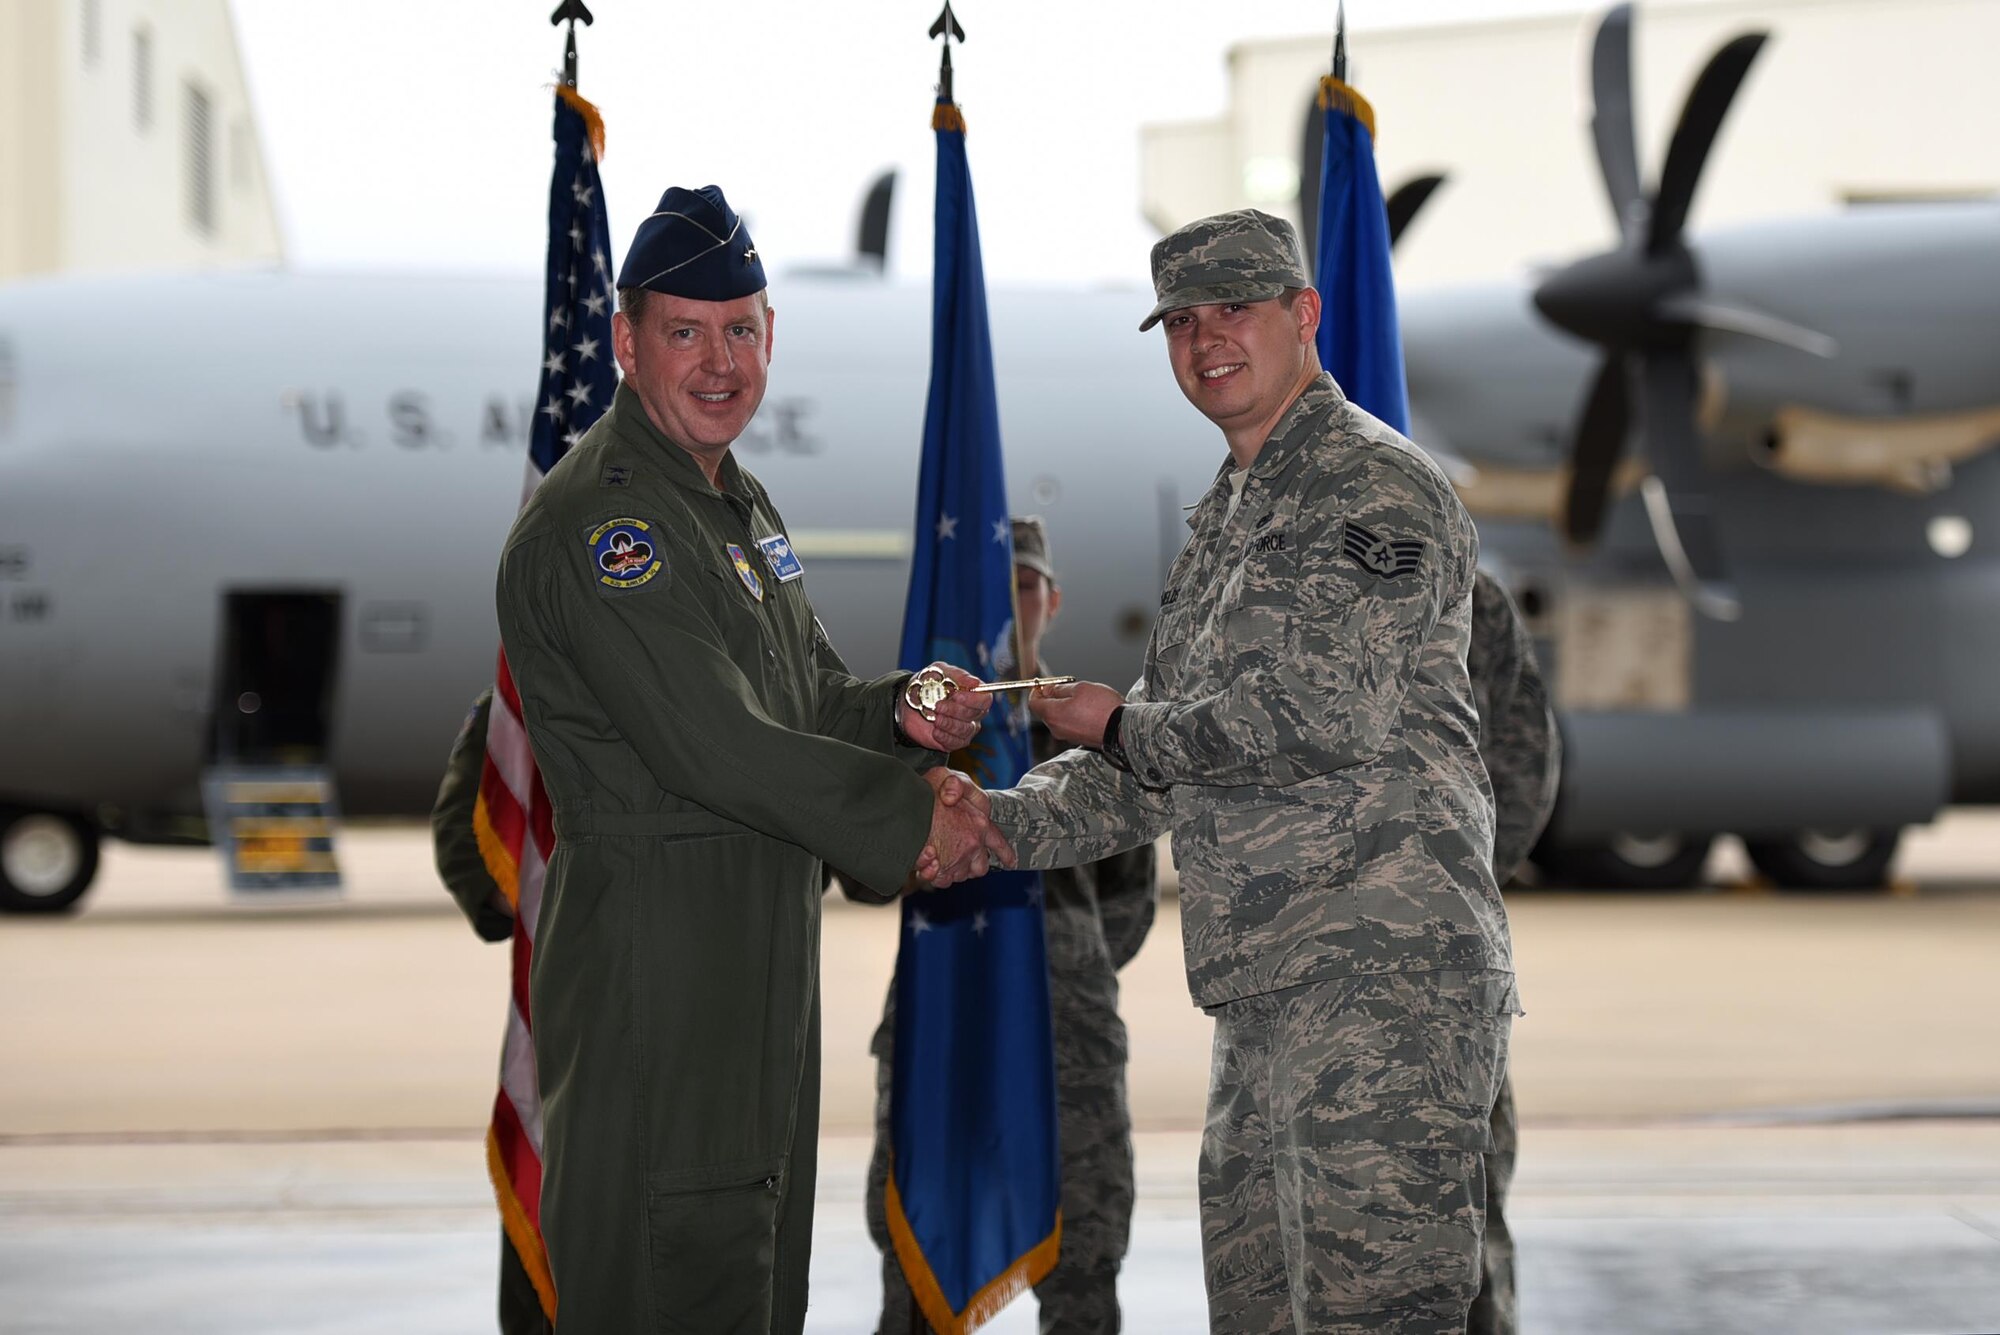 U.S. Air Force Maj. Gen. James Hecker, 19th Air Force commander, presents a ceremonial C-130J key to U.S. Air Force Staff Sgt. Joshua Shields, 314th Aircraft Maintenance Squadron C-130J crew chief, Feb. 27, 2017, at Little Rock Air Force Base, Ark. Hecker delivered the 14th and final C-130J to the 314th Airlift Wing fleet, completing the transition from the H- to J-model. (U.S. Air Force photo by Airman 1st Class Kevin Sommer Giron)